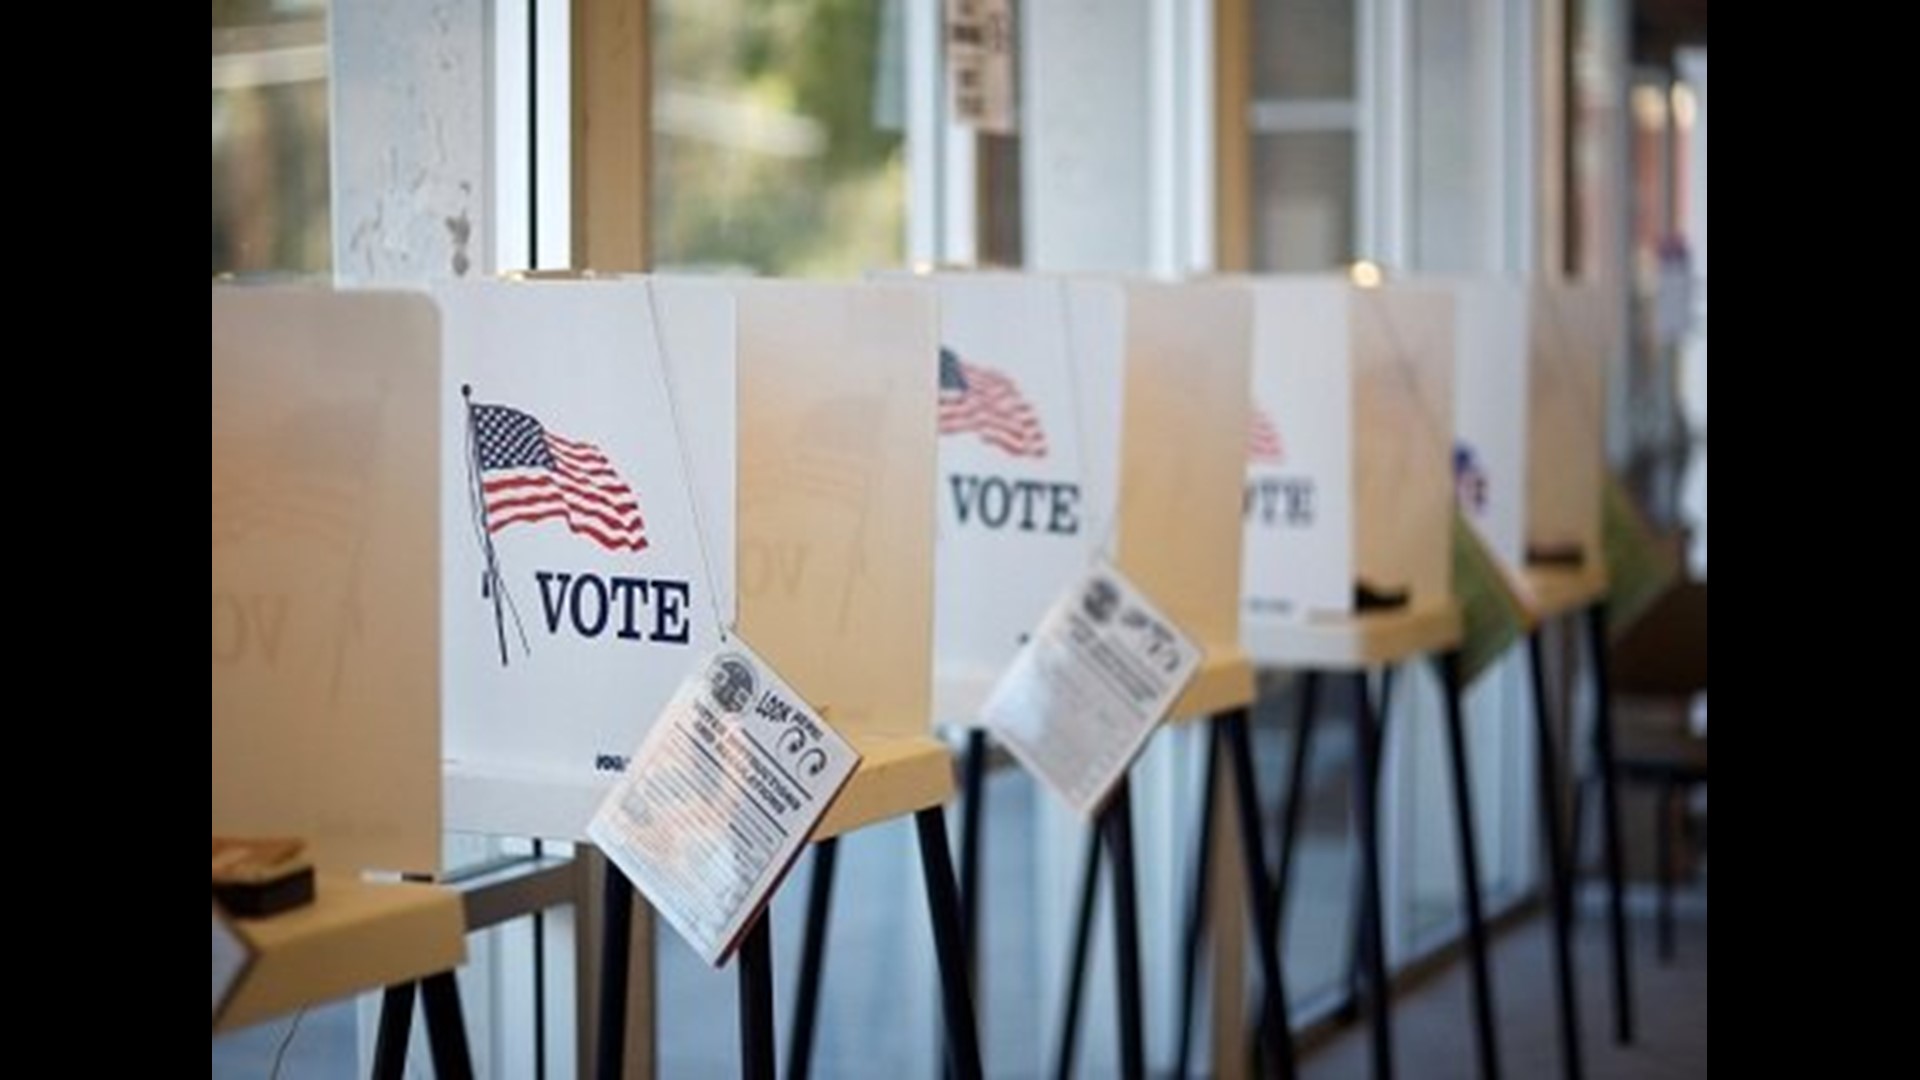 Dauphin County Board of Elections approves new precincts in West